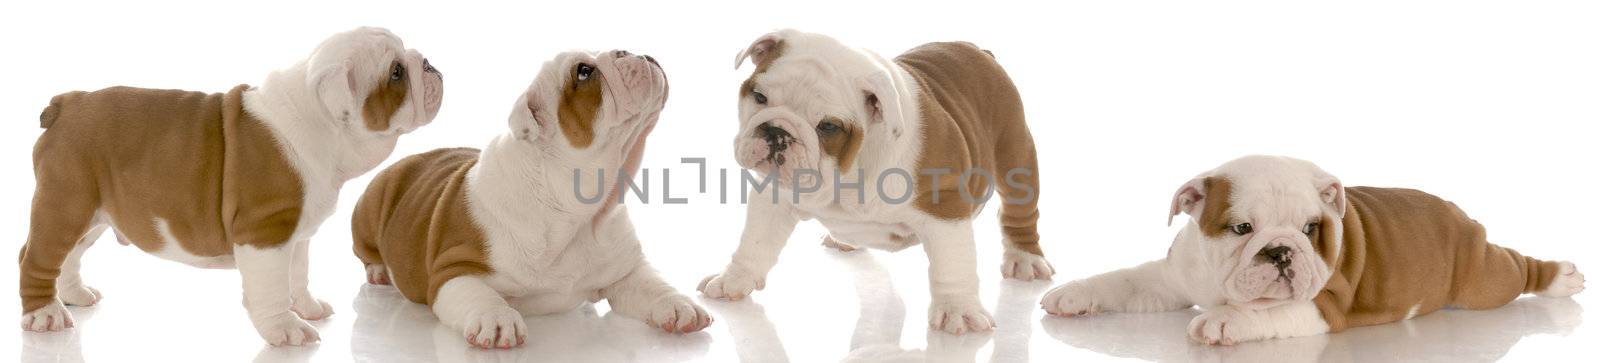 seven week old red and white english bulldog puppy collection